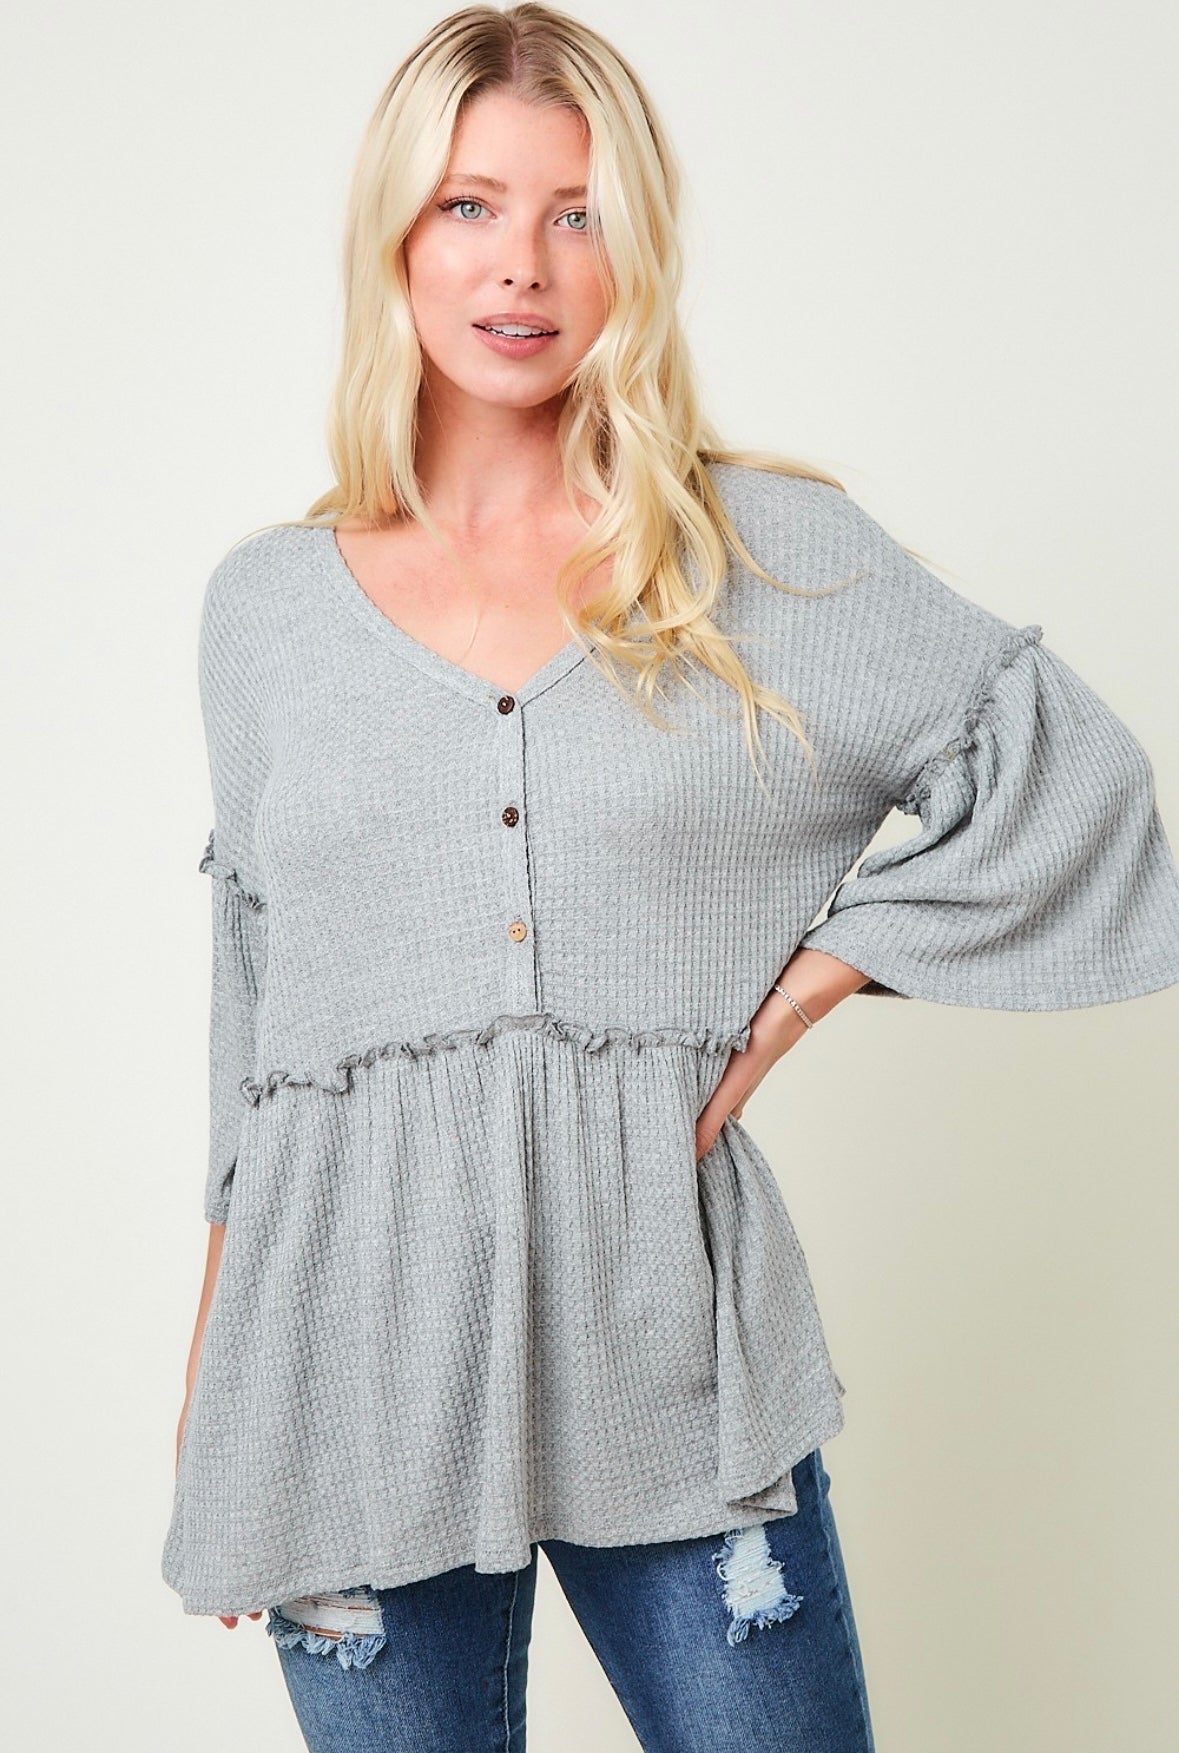 TWO COLORS - Danni Waffle Knit Peplum Top